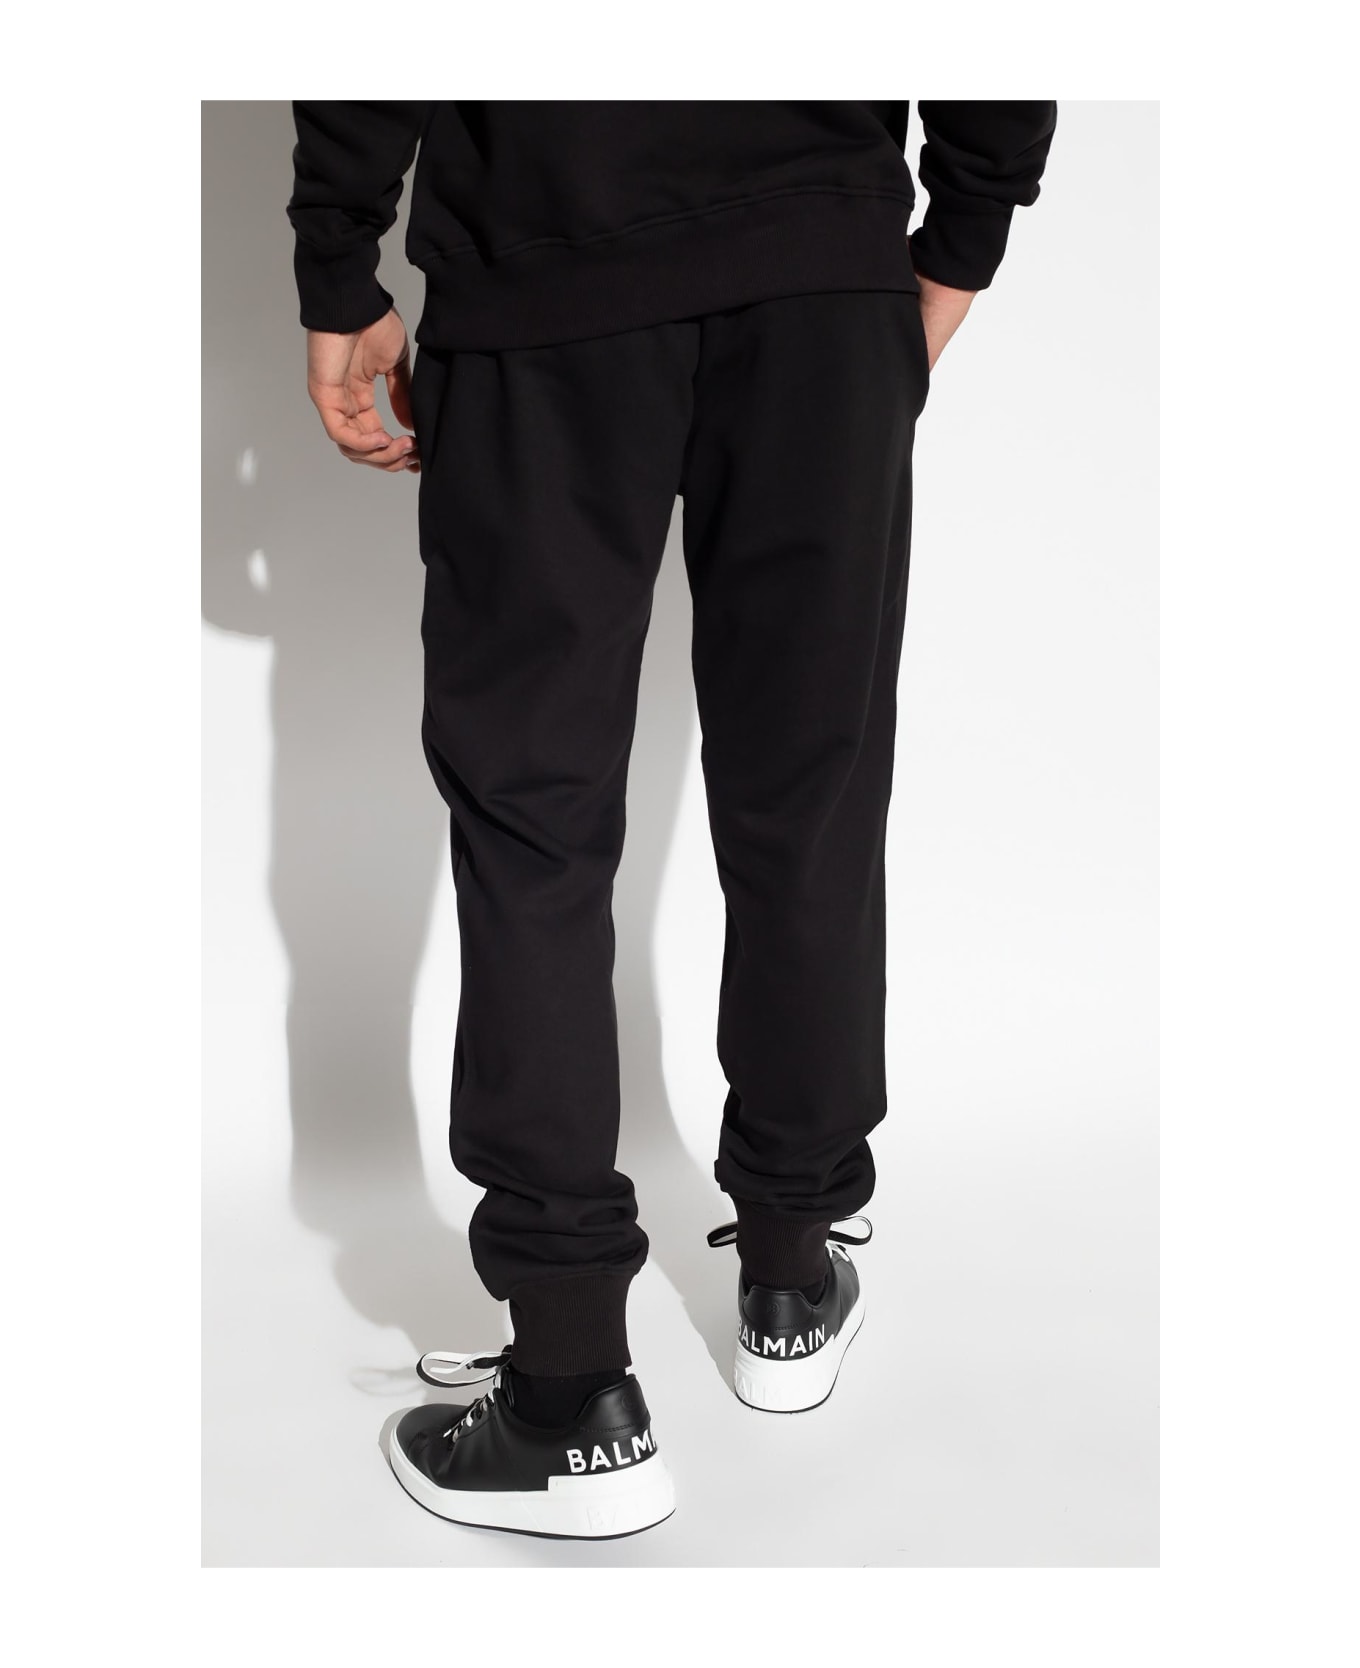 Versace Jeans Couture Jogging Trousers - Nero/argento スウェットパンツ